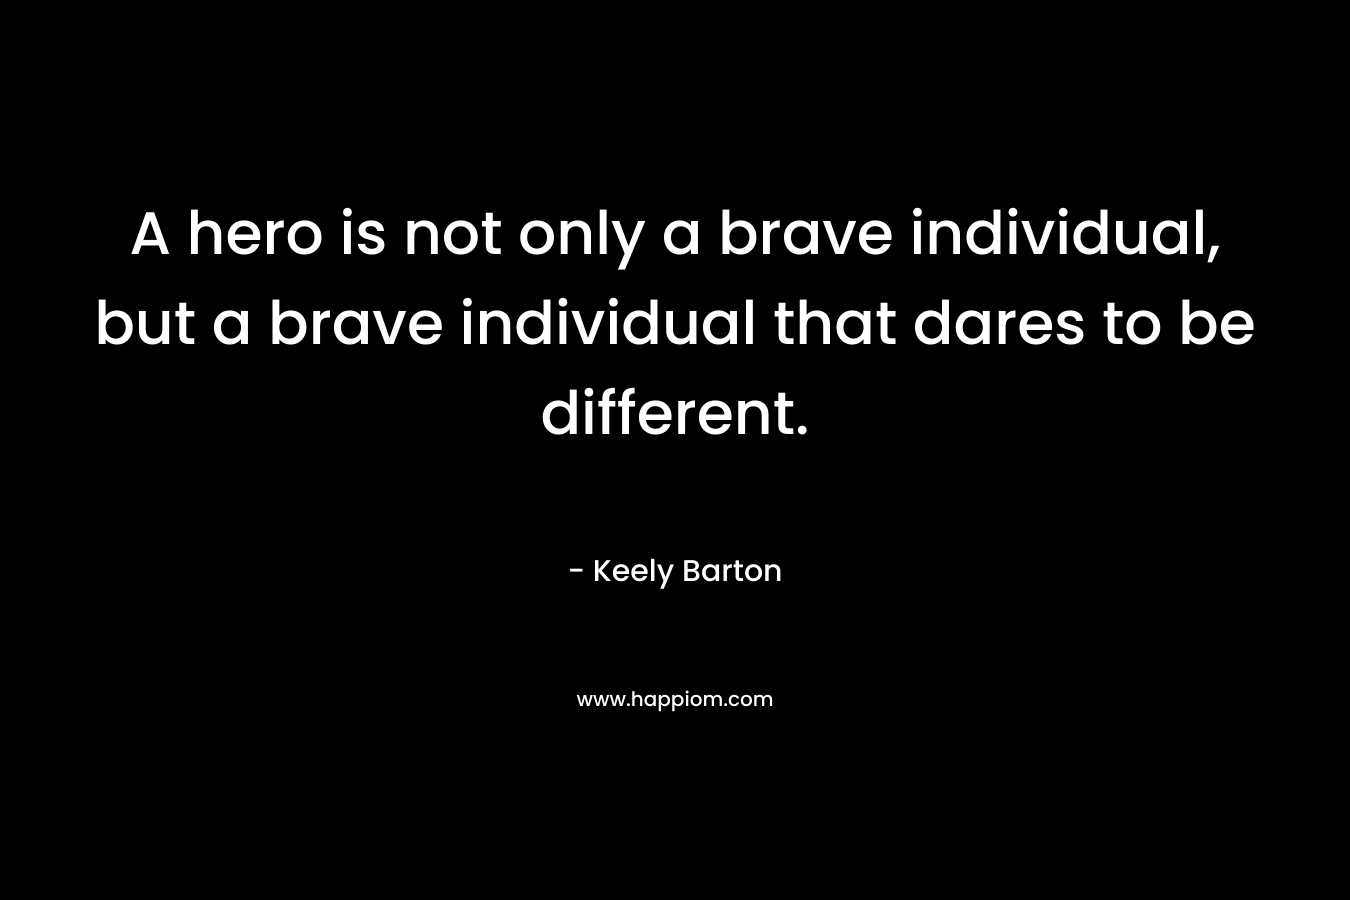 A hero is not only a brave individual, but a brave individual that dares to be different.